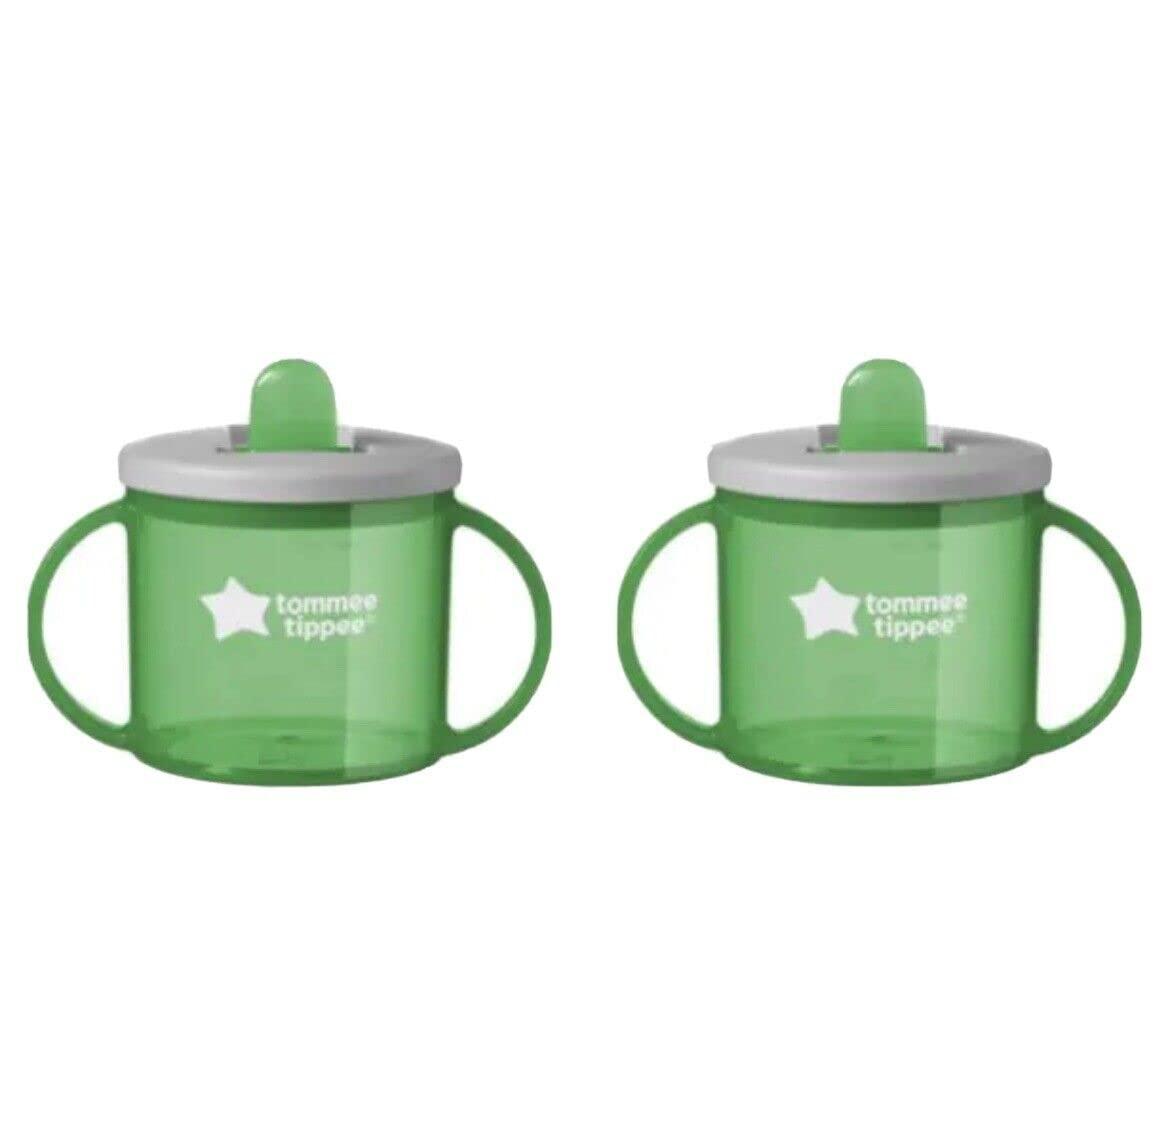 Tommee Tippee First Cup